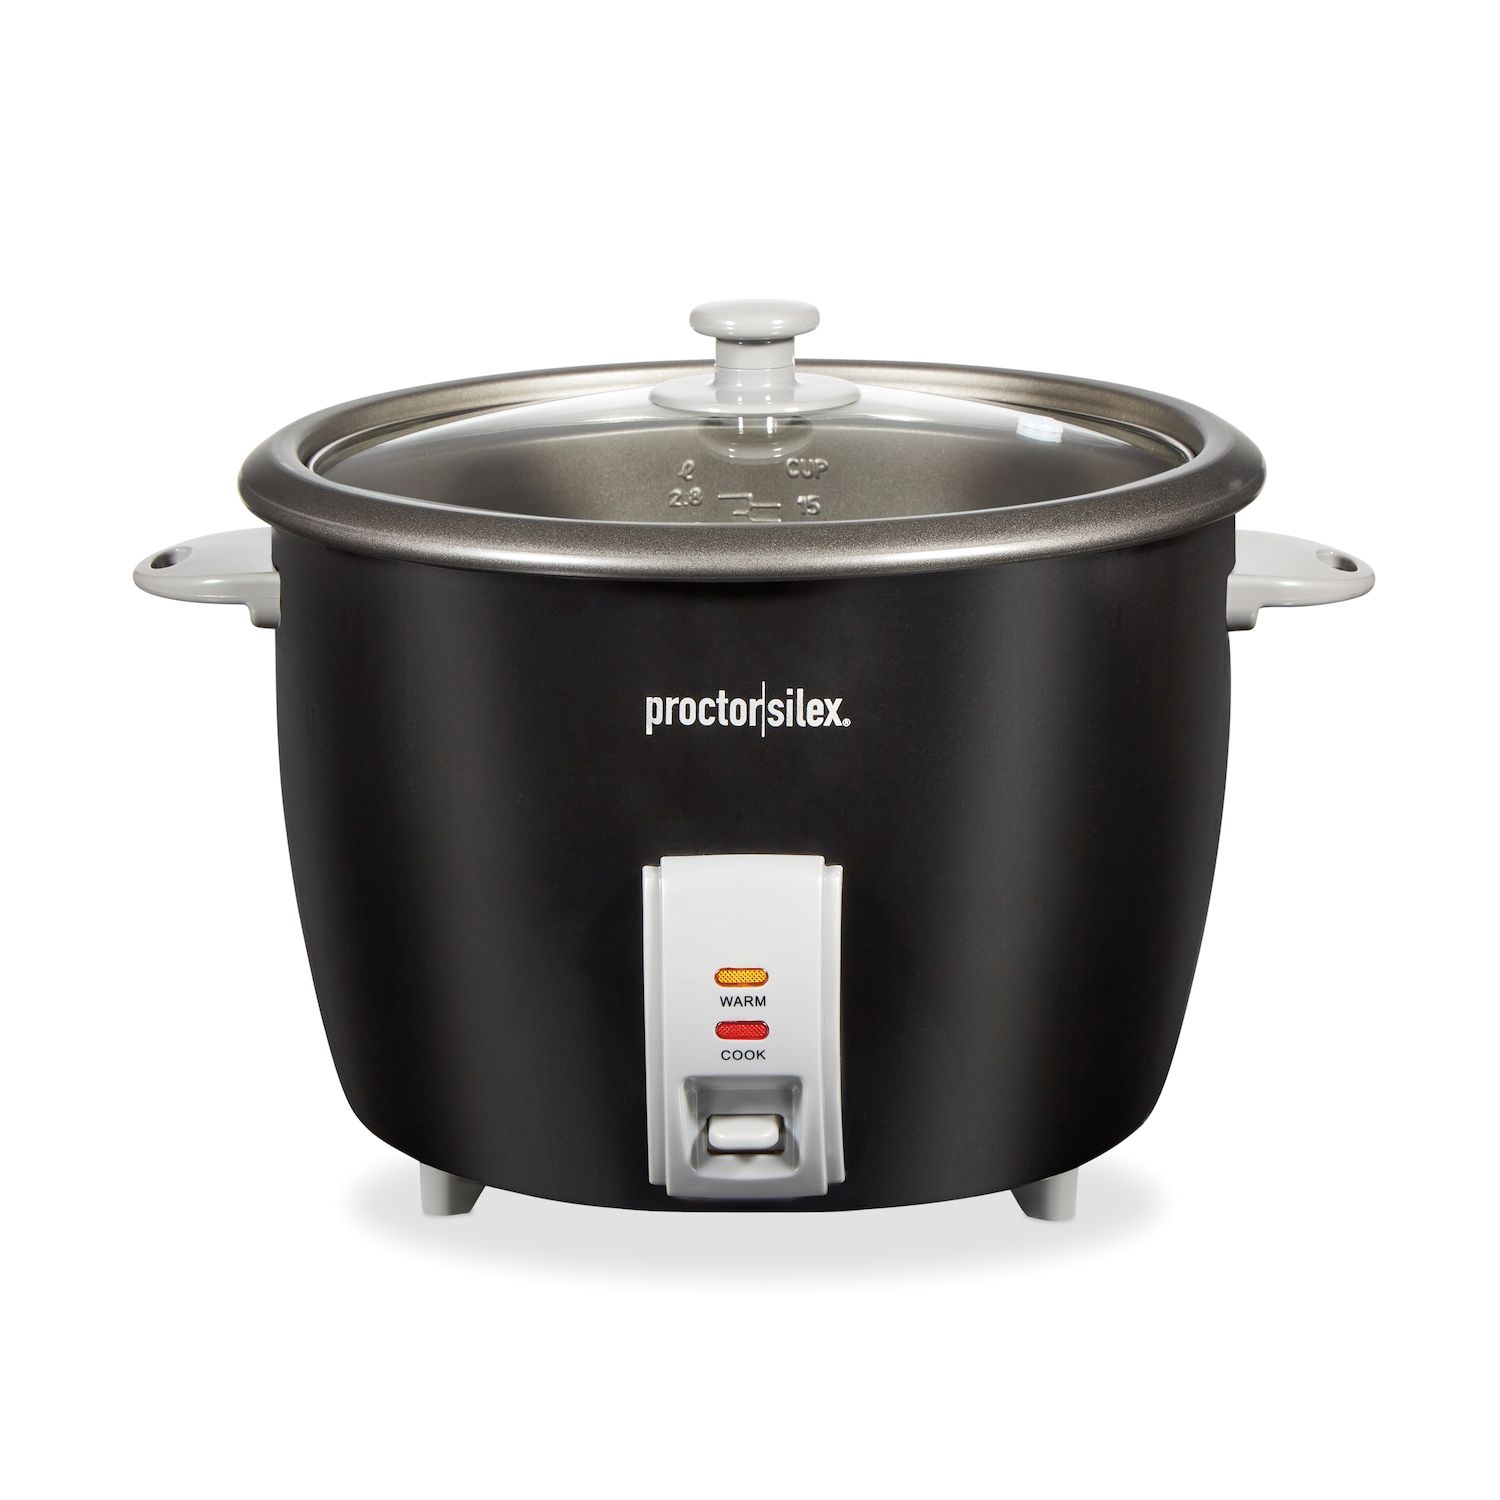 Bistro 8-Cup Traditional Rice Cooker - The Fancy Frog Boutique